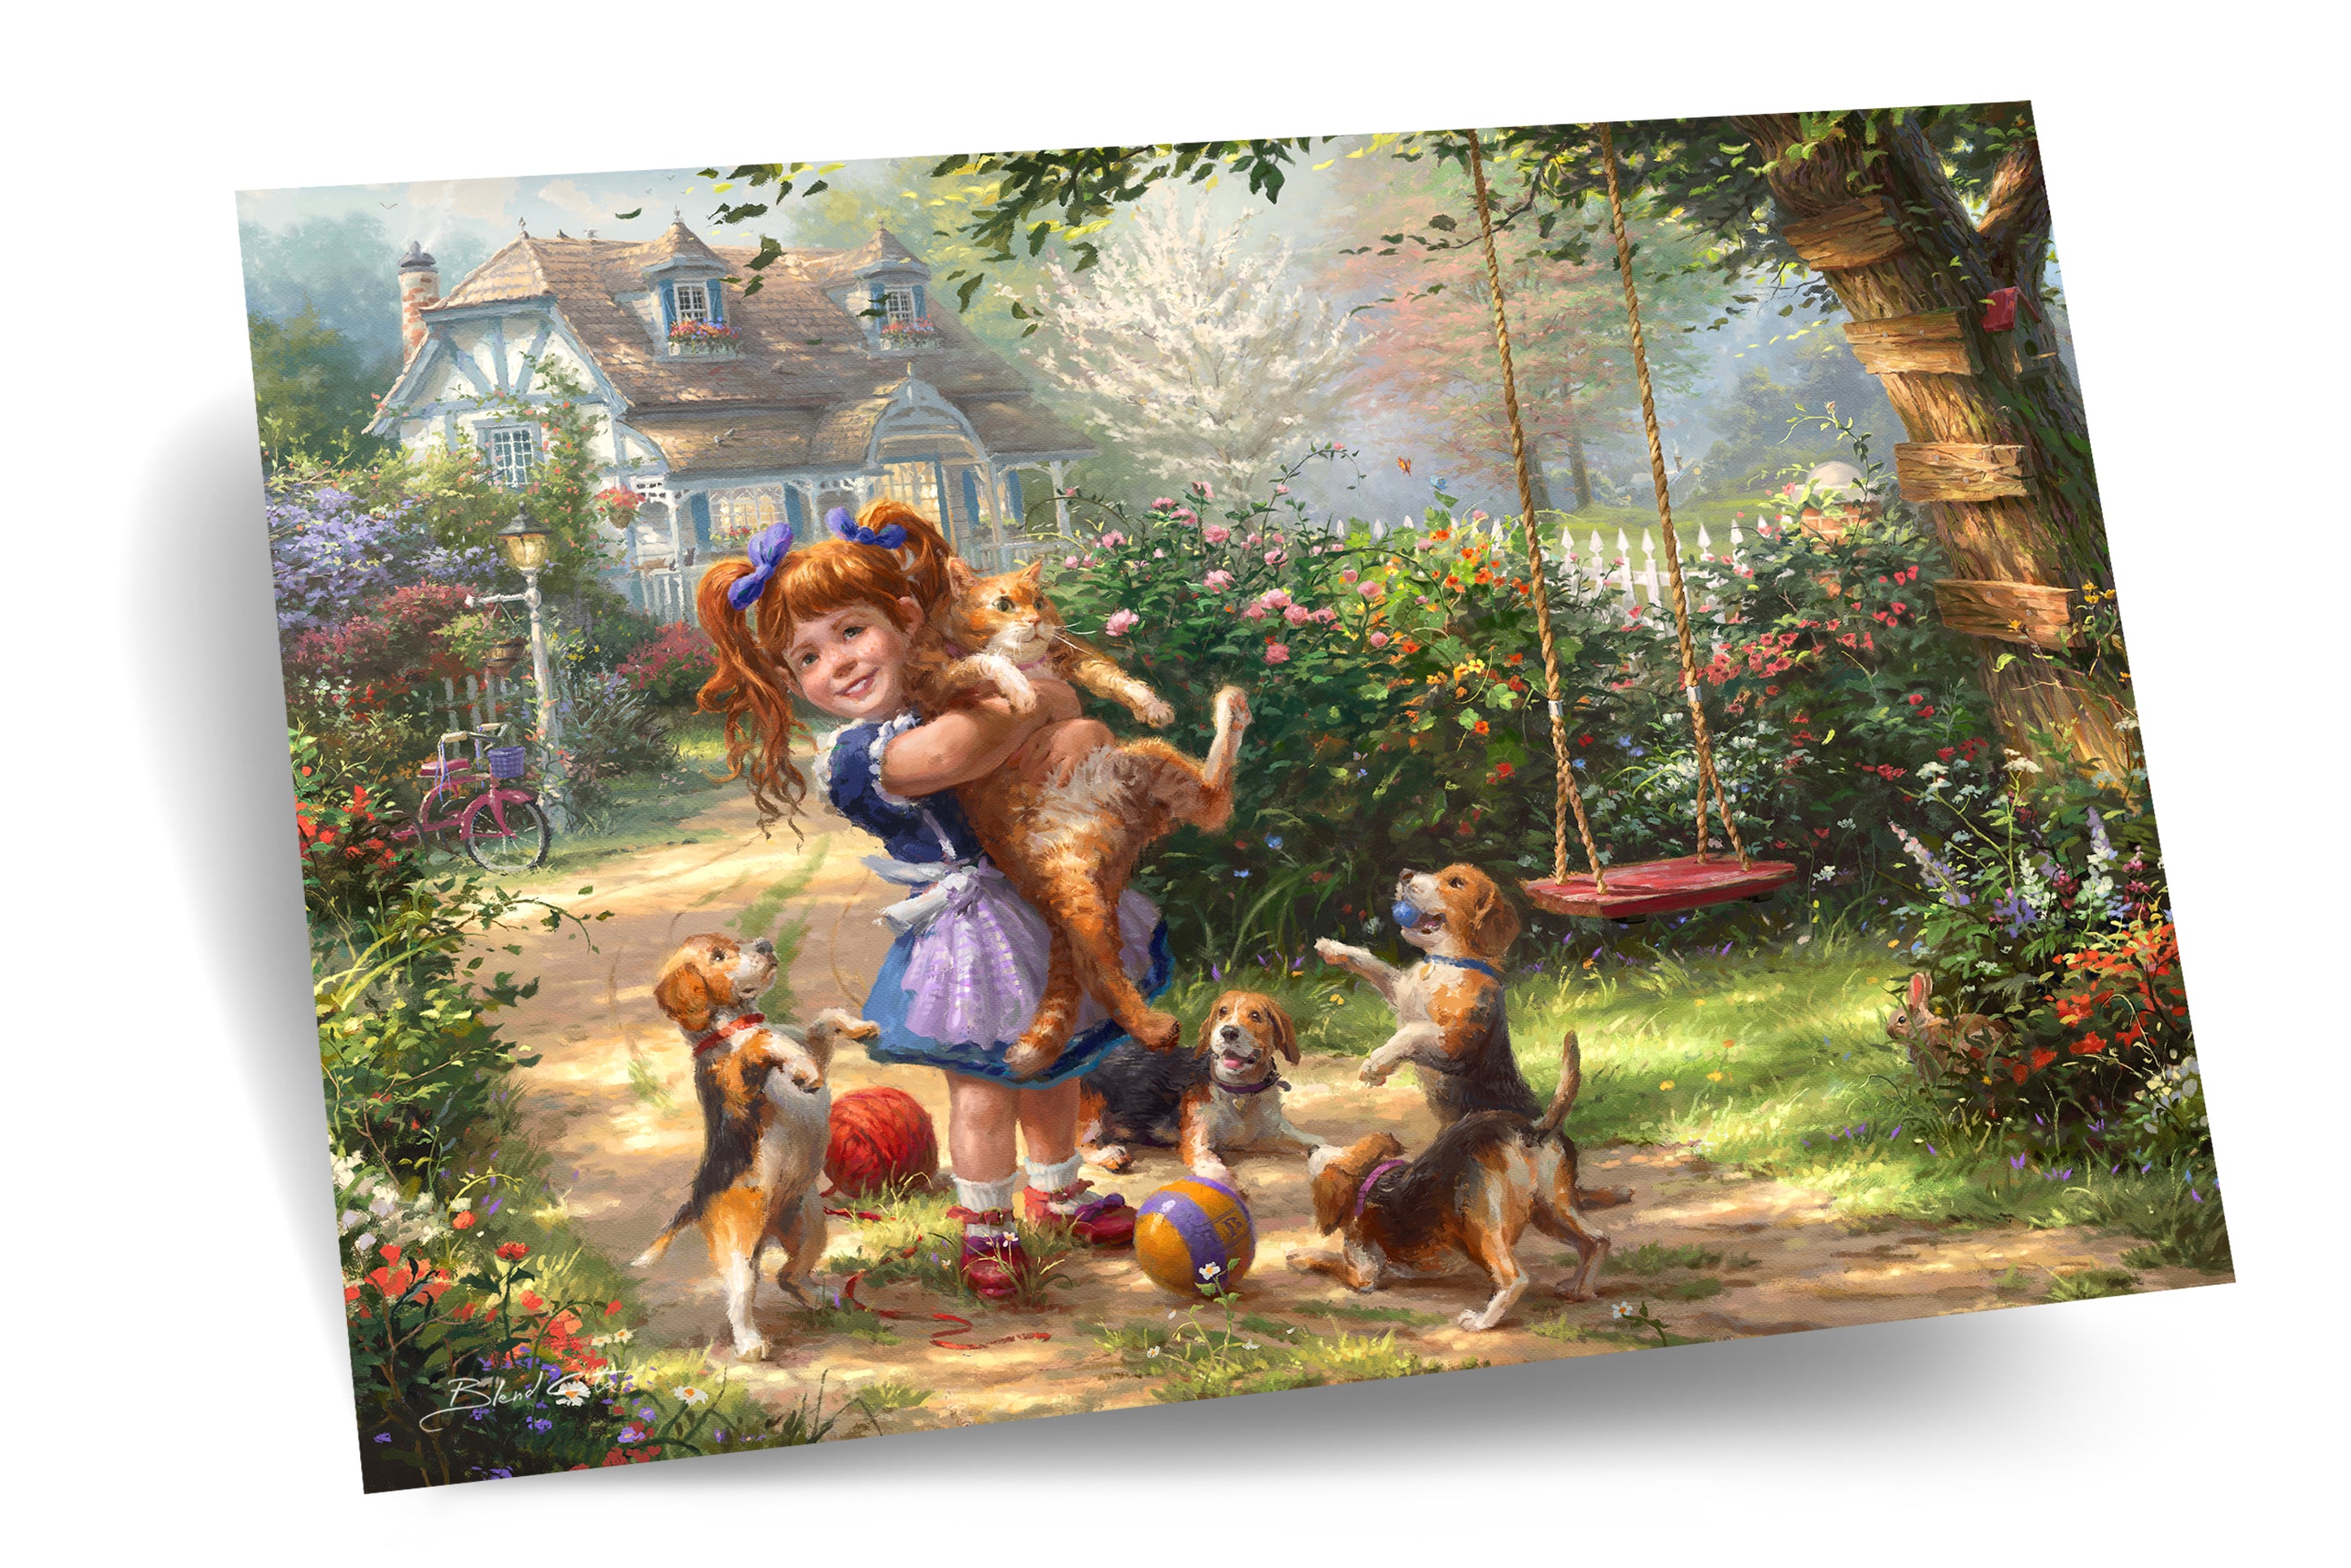 Painting of a little girl and her pets, one large orange tabby cat and beagle puppies all playing in a beautiful garden in the countryside, in a realistic style.